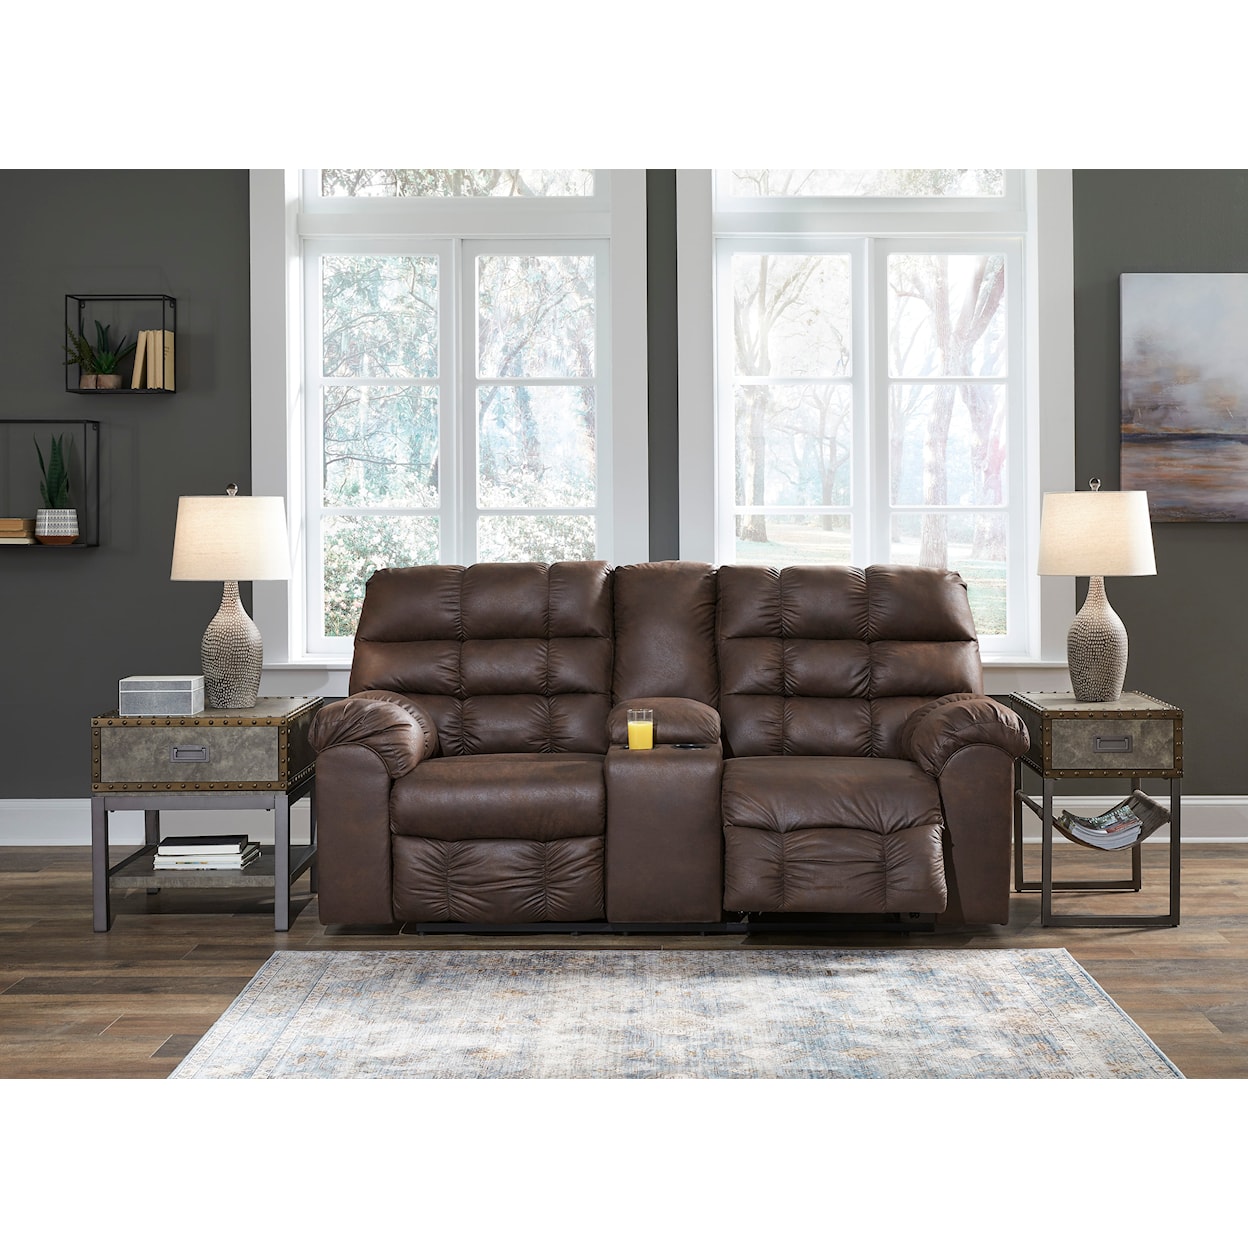 Ashley Signature Design Derwin Reclining Loveseat with Console